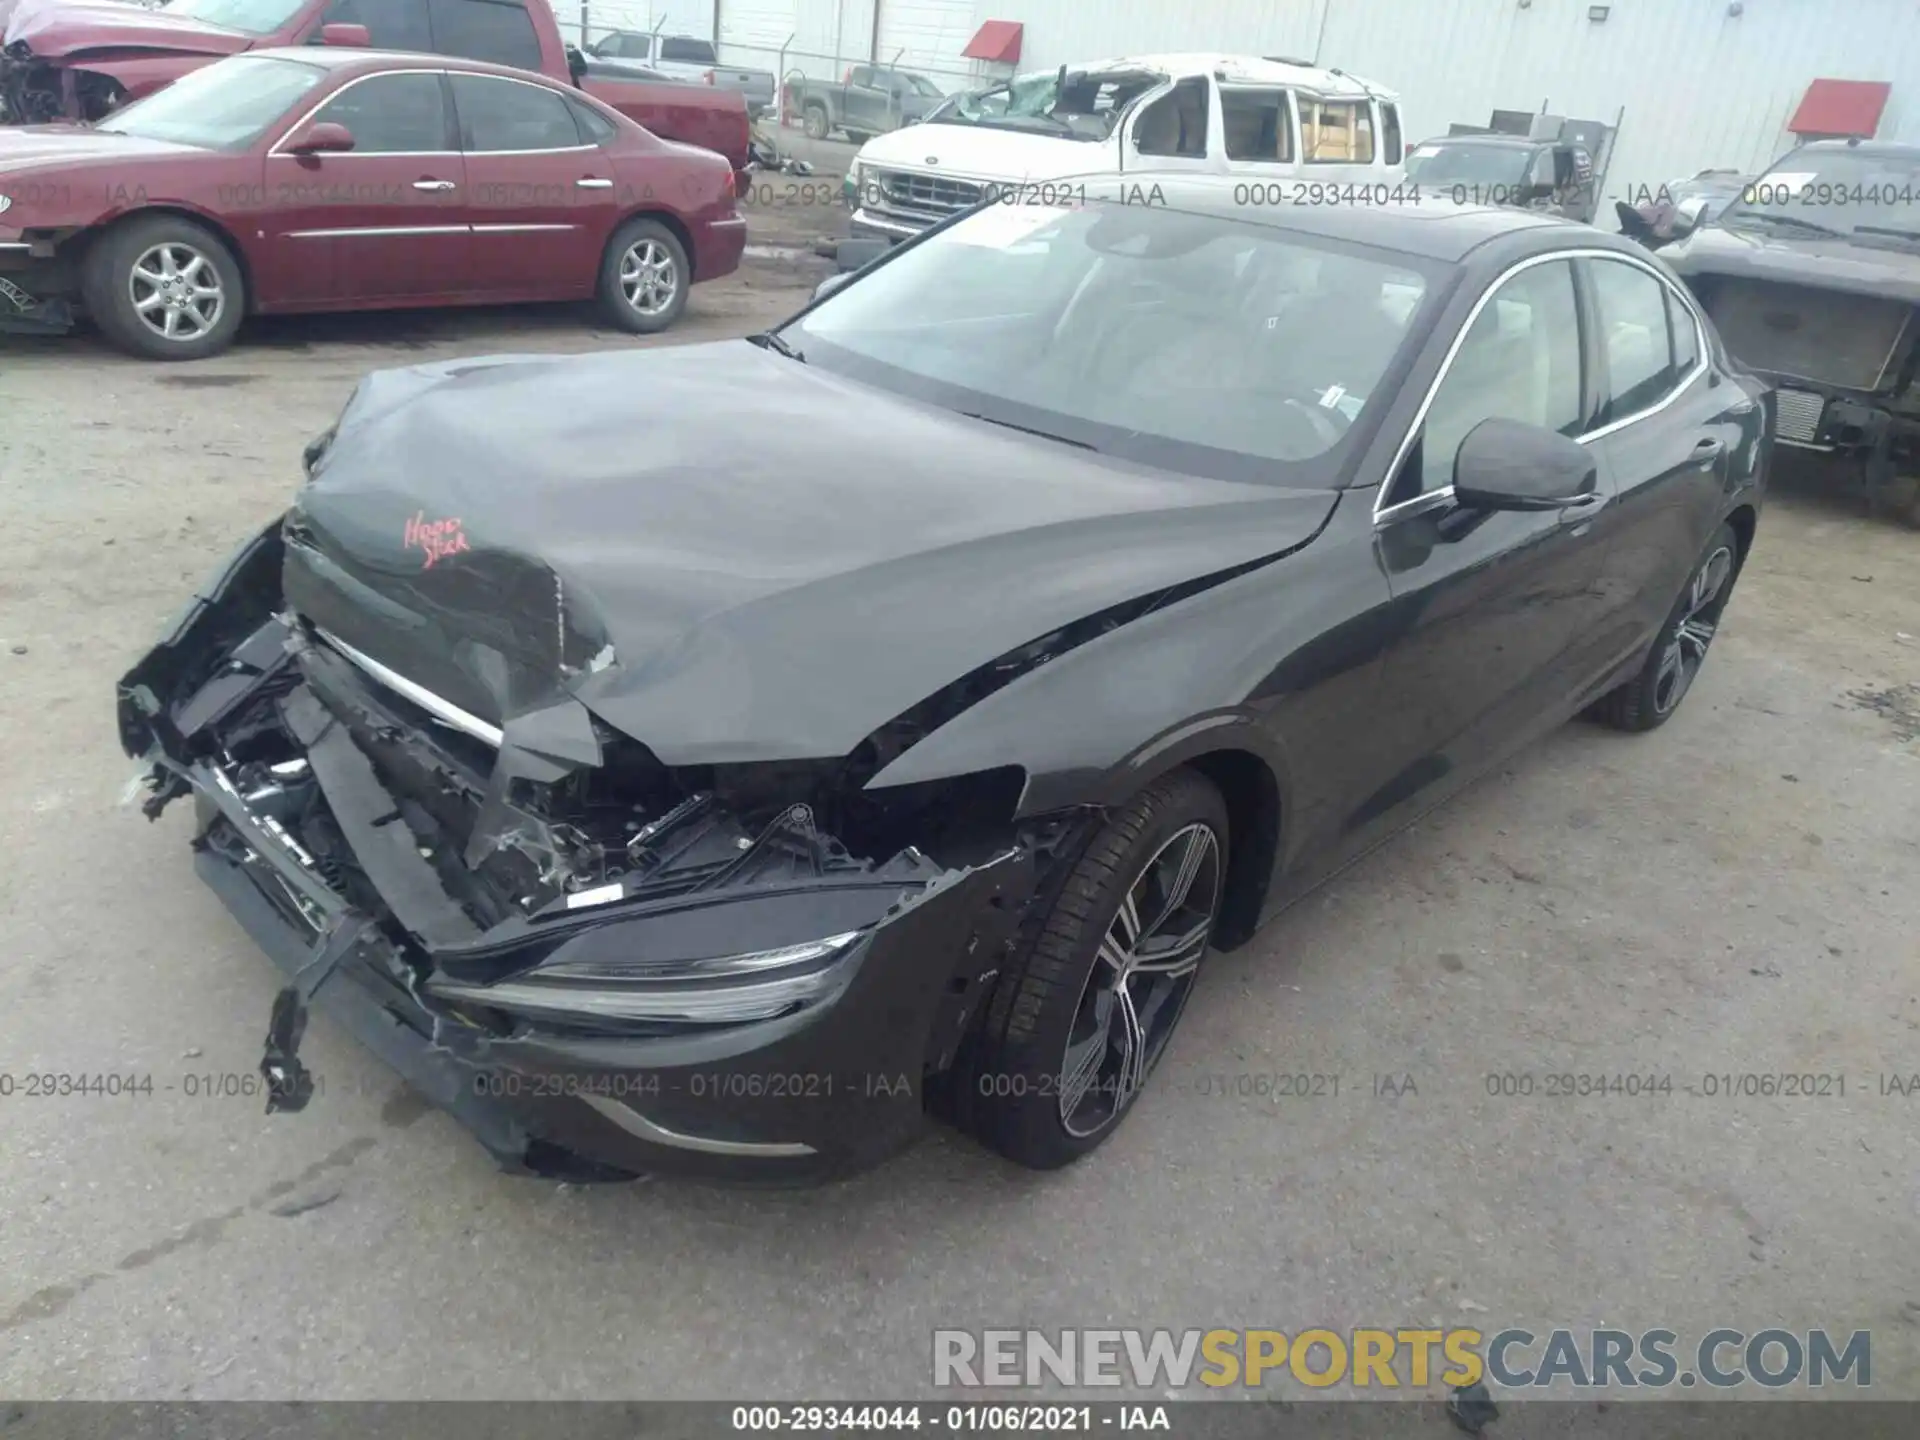 2 Photograph of a damaged car 7JRA22TL2MG081677 VOLVO S60 2021